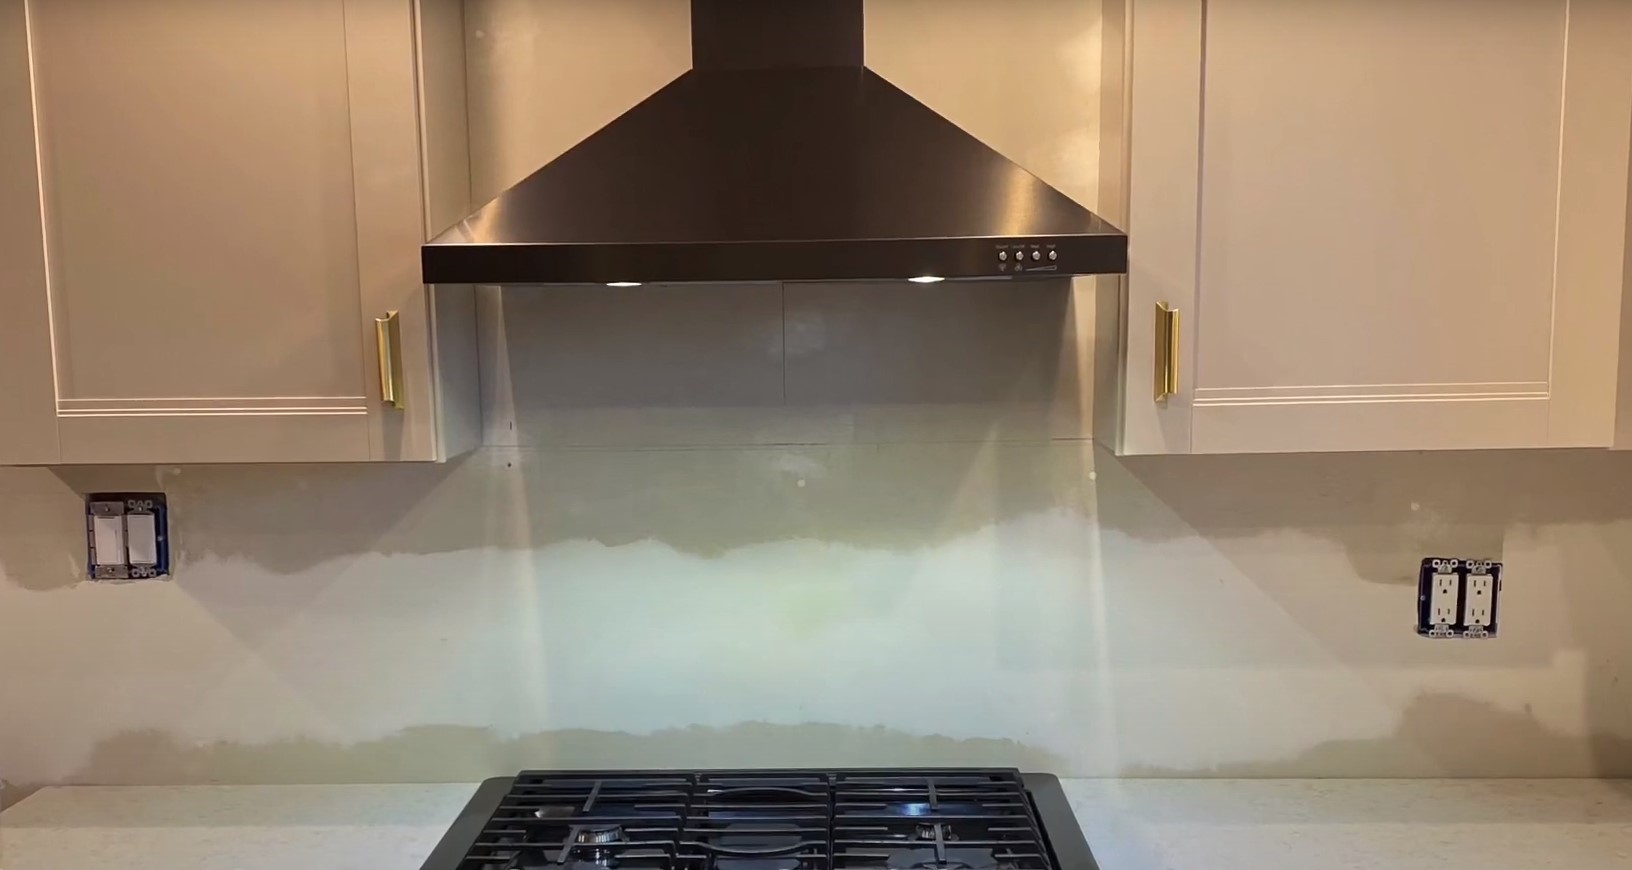 How to vent a range hood on an interior wall